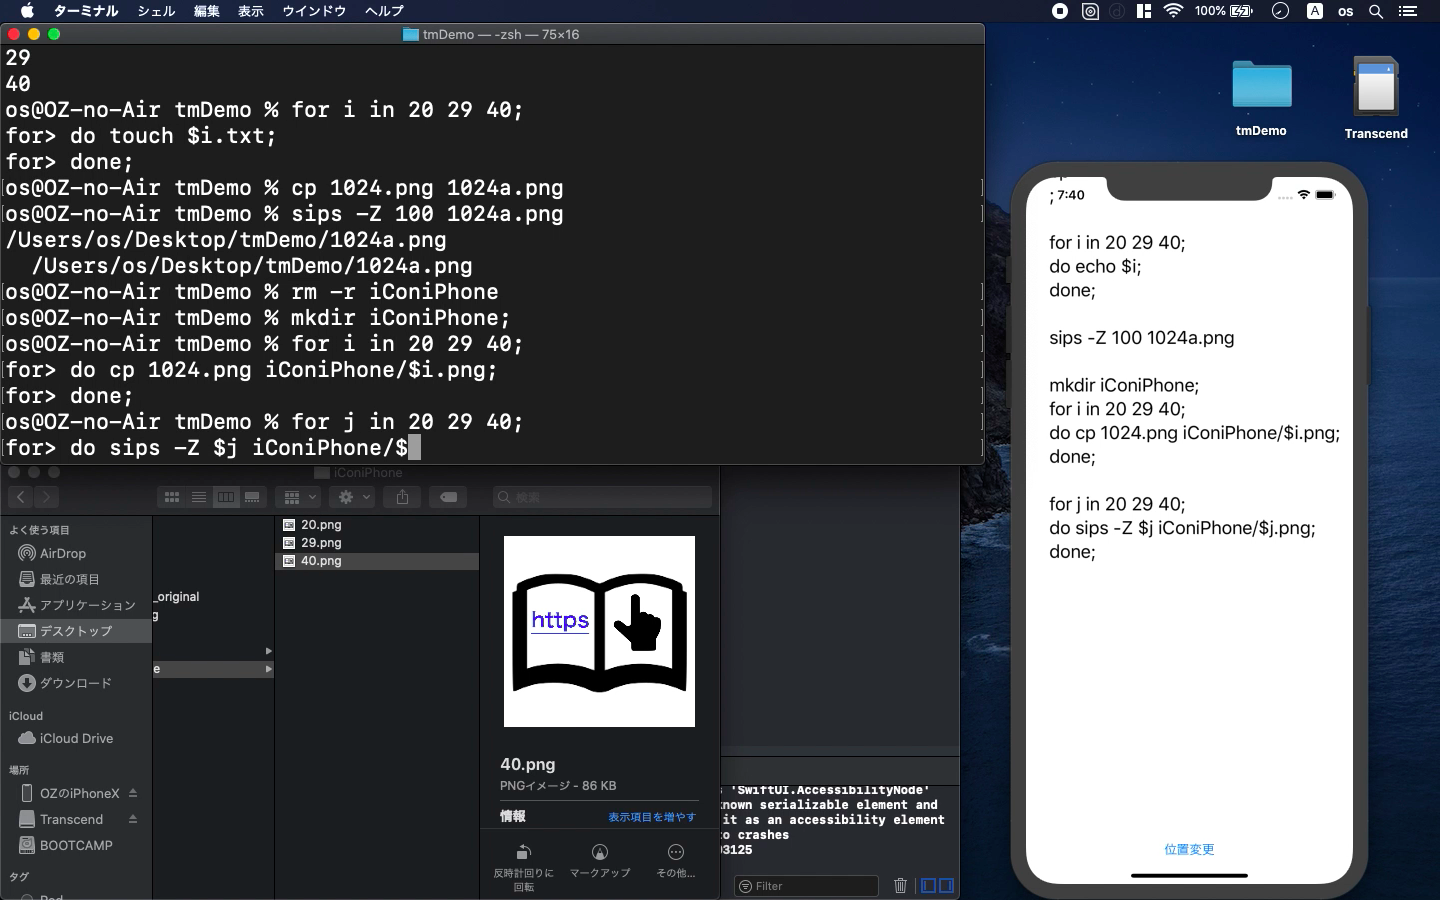 Resize iPhone app icons with linux bash command line with sips
